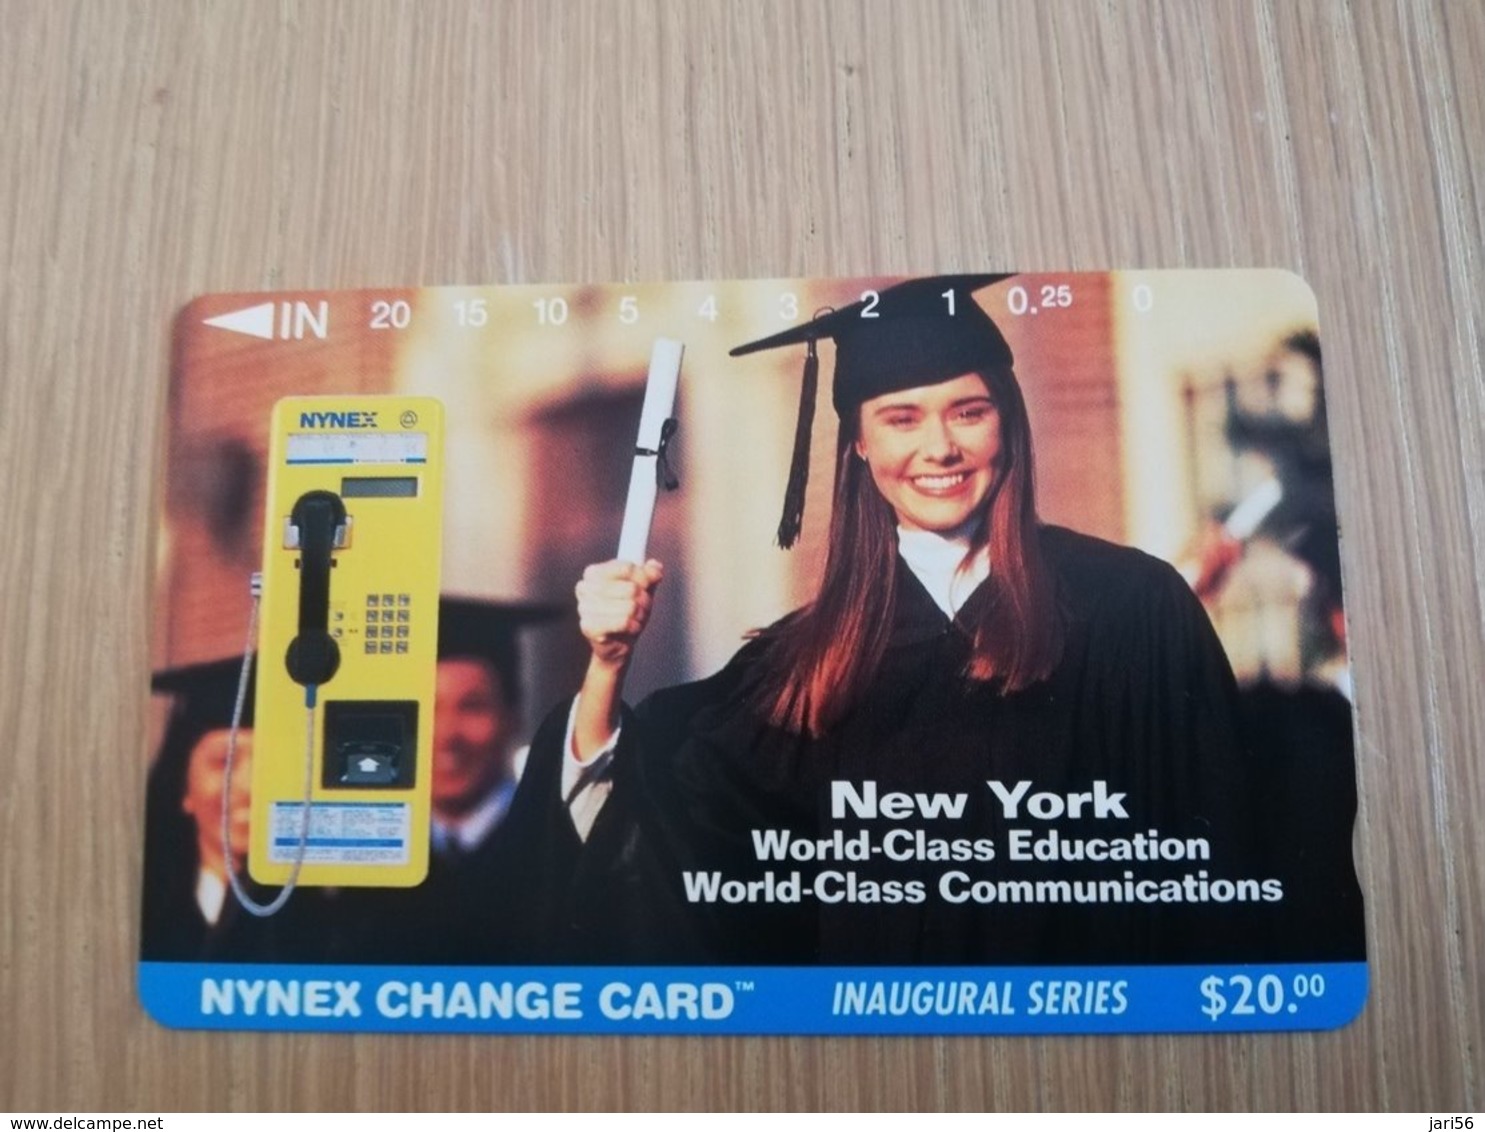 UNITED STATES  NYNEX  NEW YORKS FIRST PHONE CARD INAUGURAL SERIES  4 CARDS   MINT   LIMITED EDITION ** 1396**